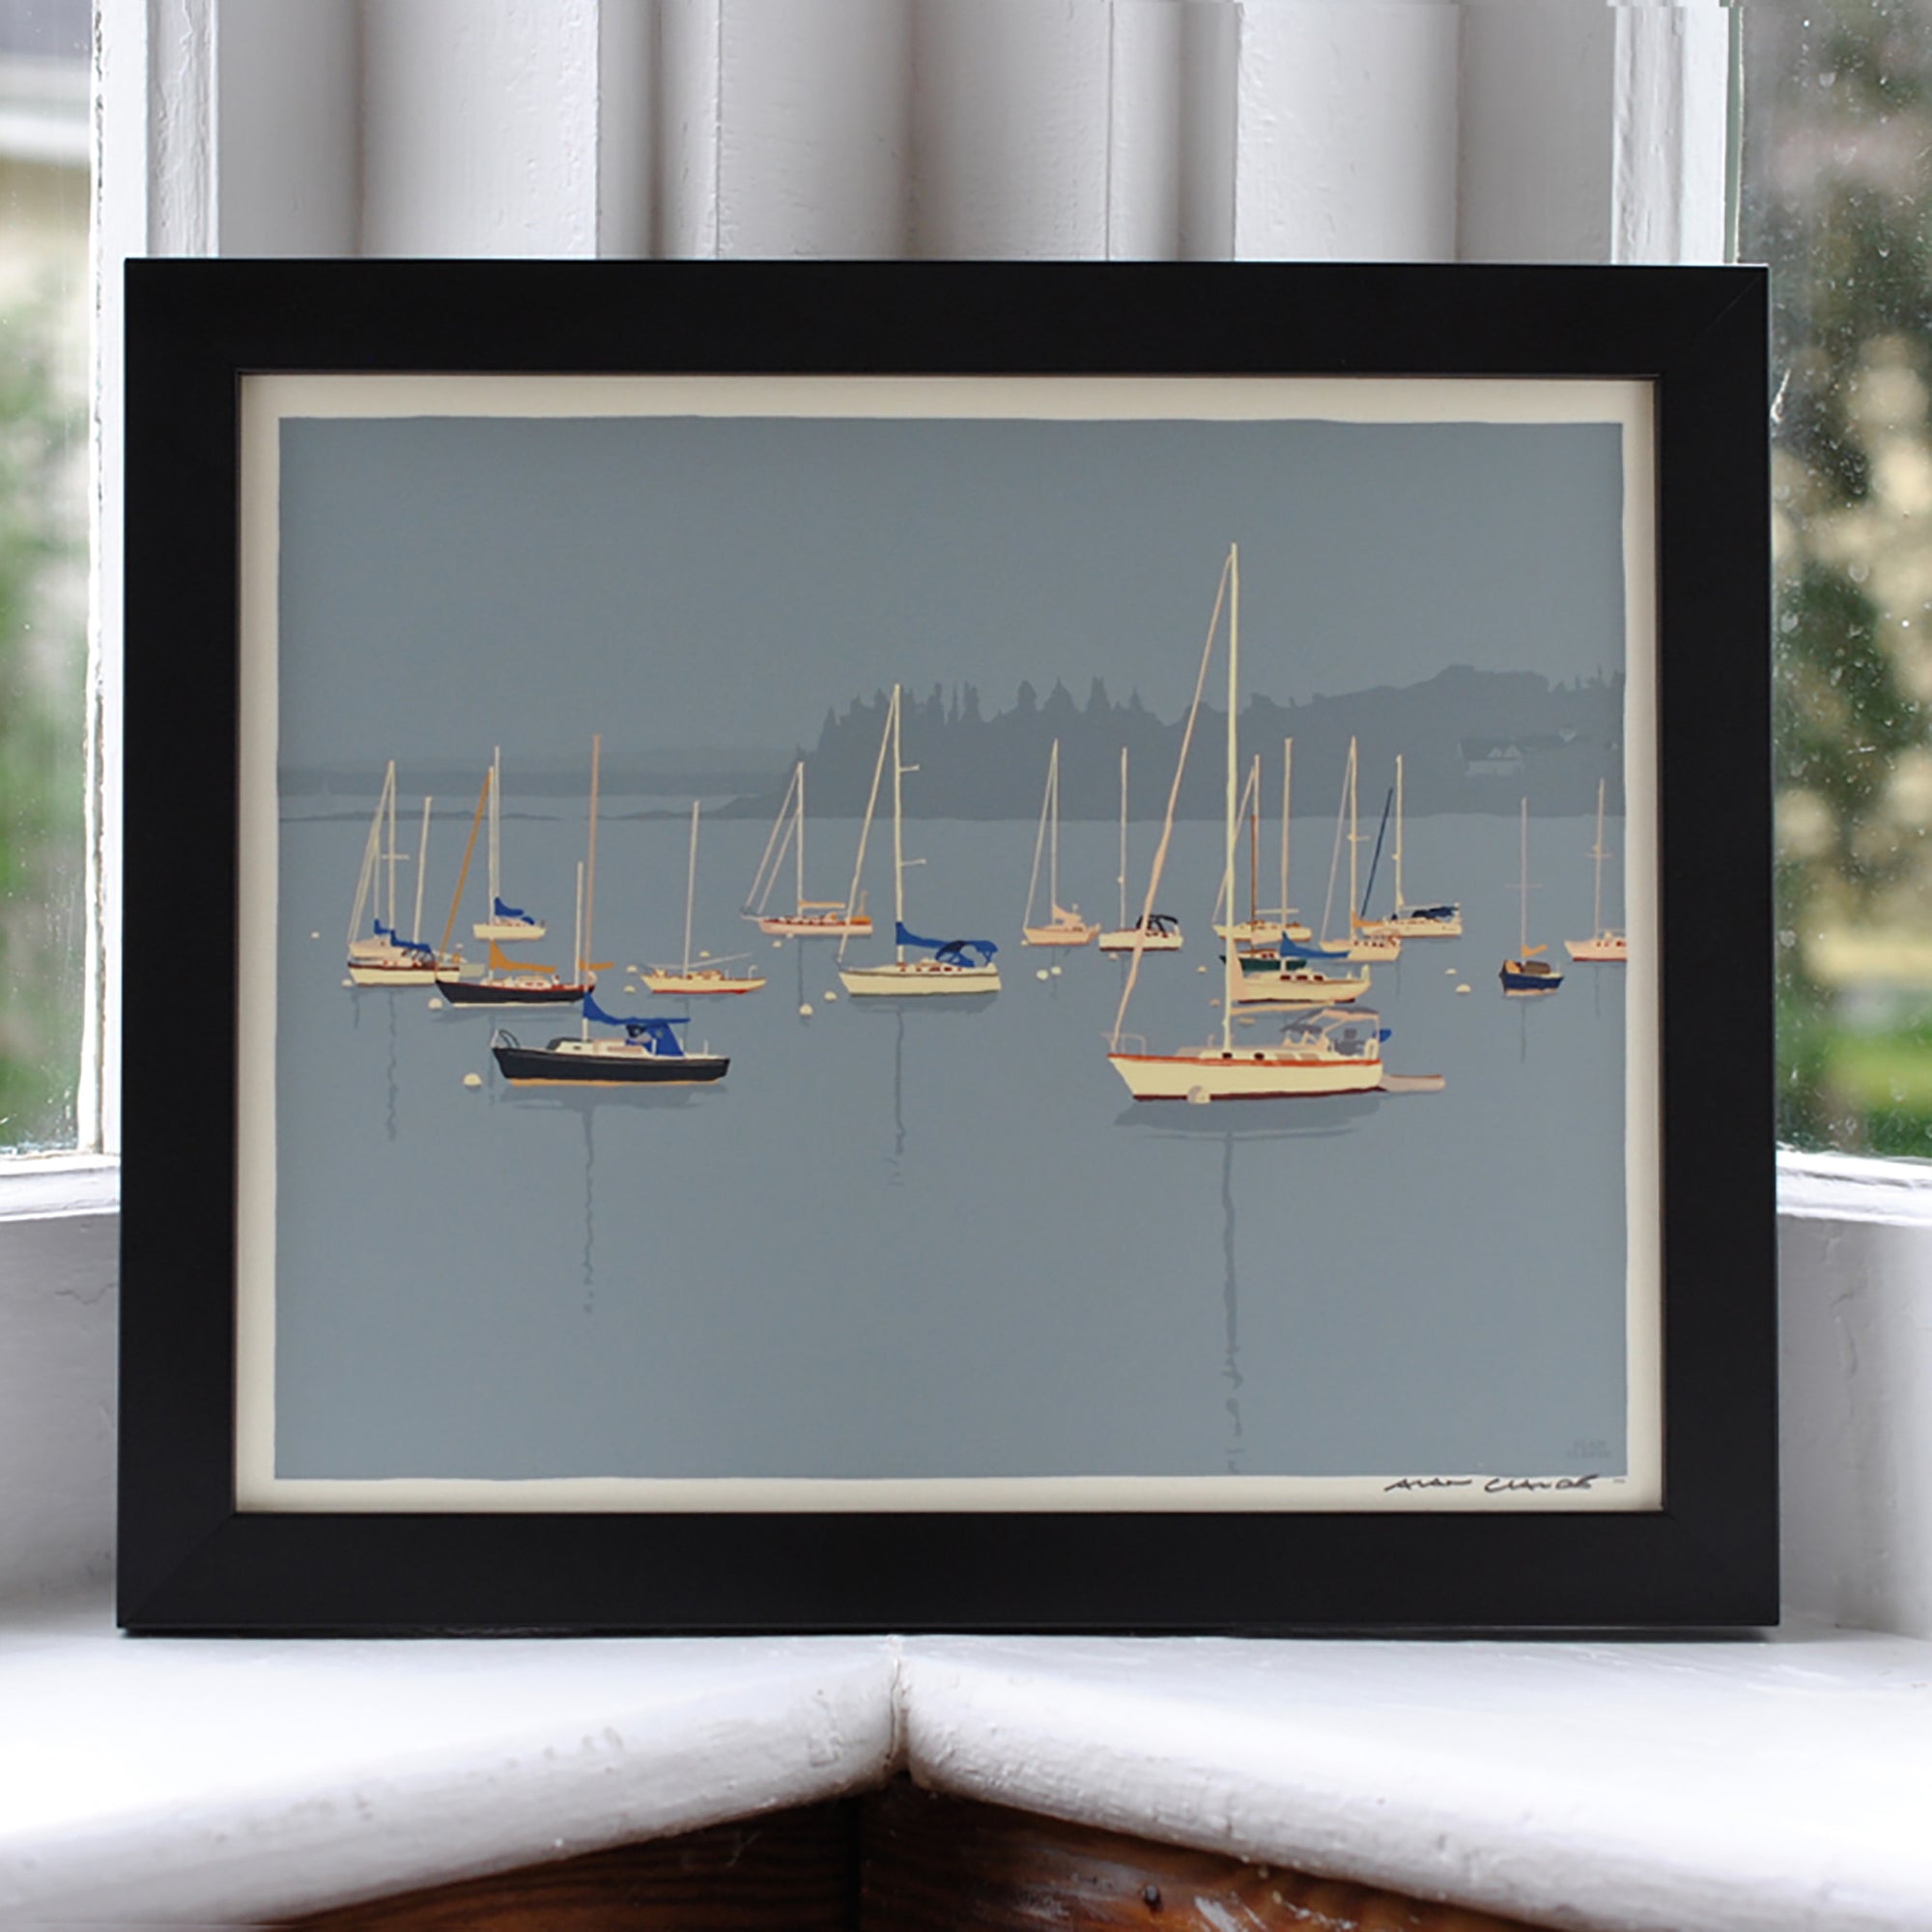 Sailboats in Rockland Harbor Art Print 8" x 10" Horizontal Framed Wall Poster By Alan Claude - Maine